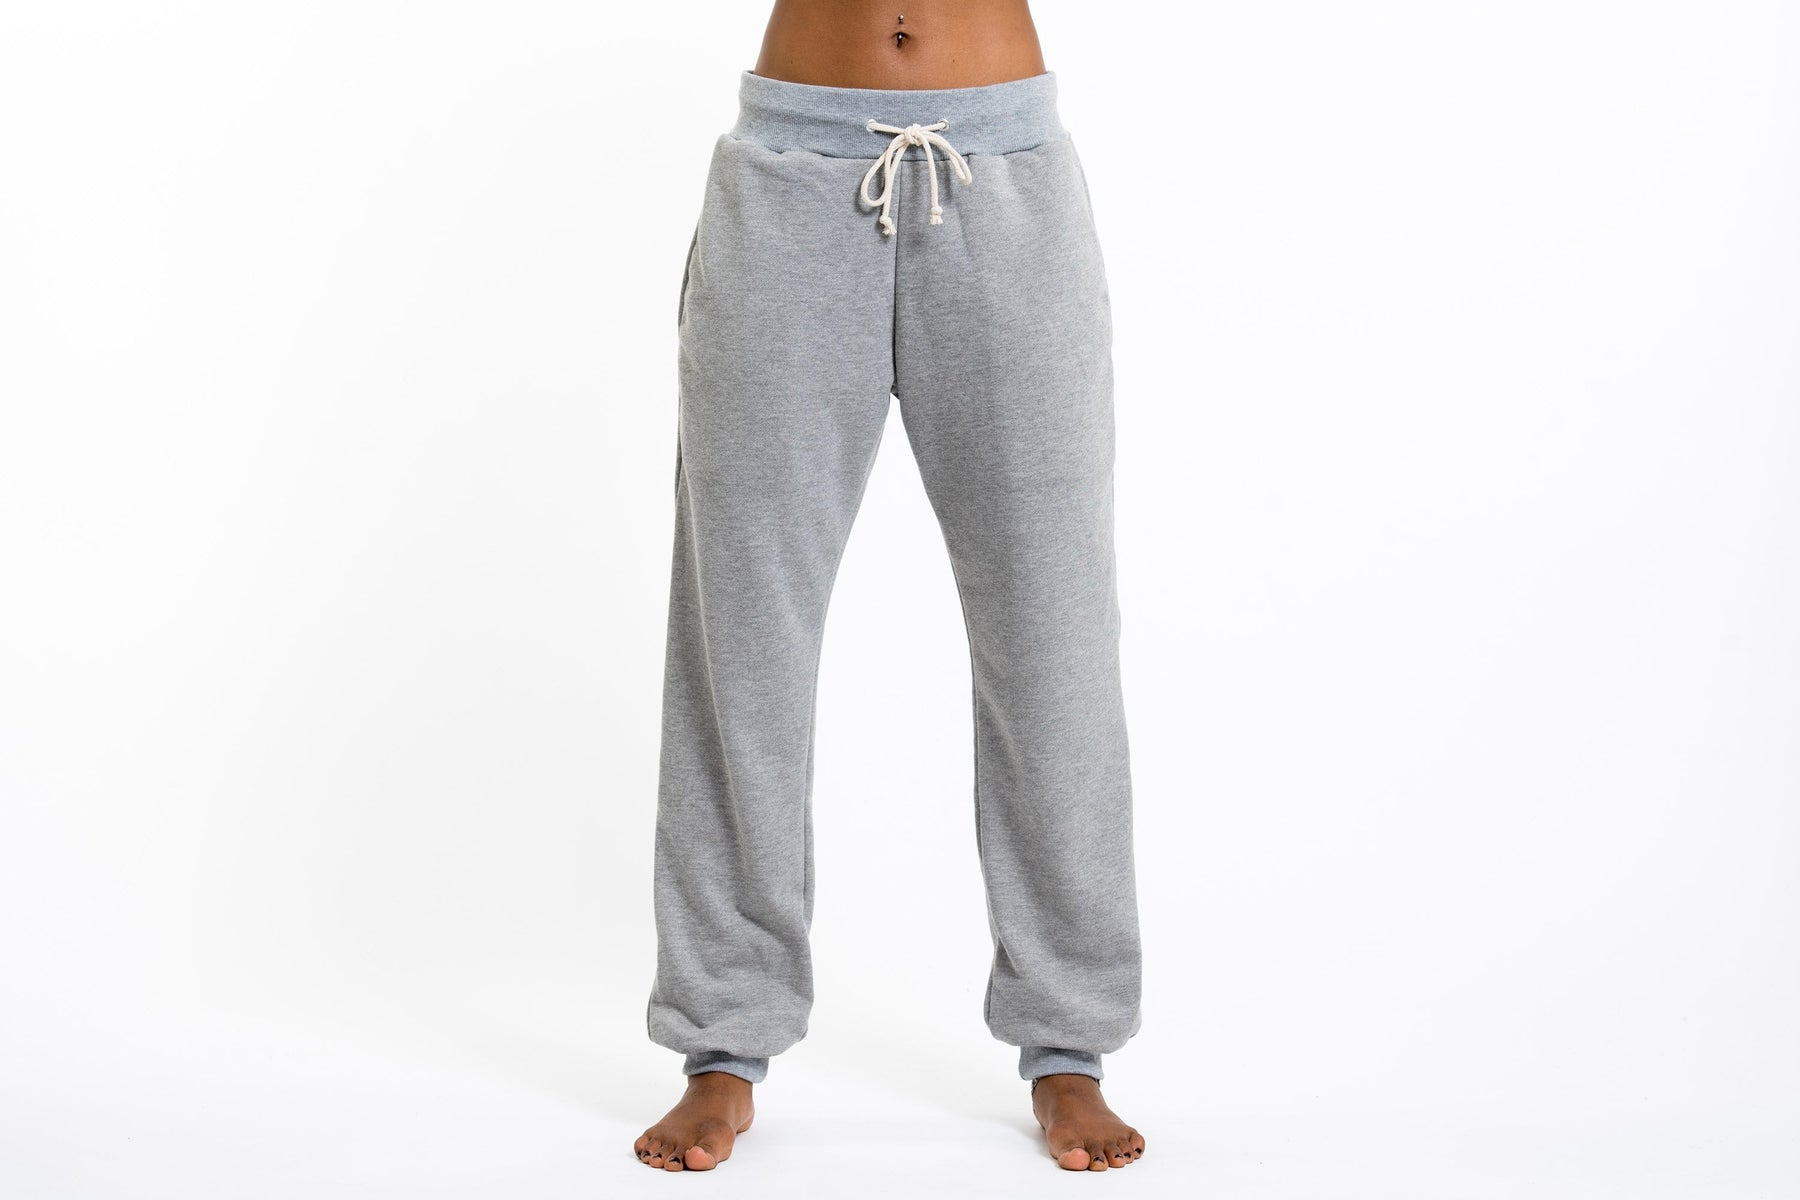 Sure Design Unisex Terry Pants with Aztec Pockets in Gray